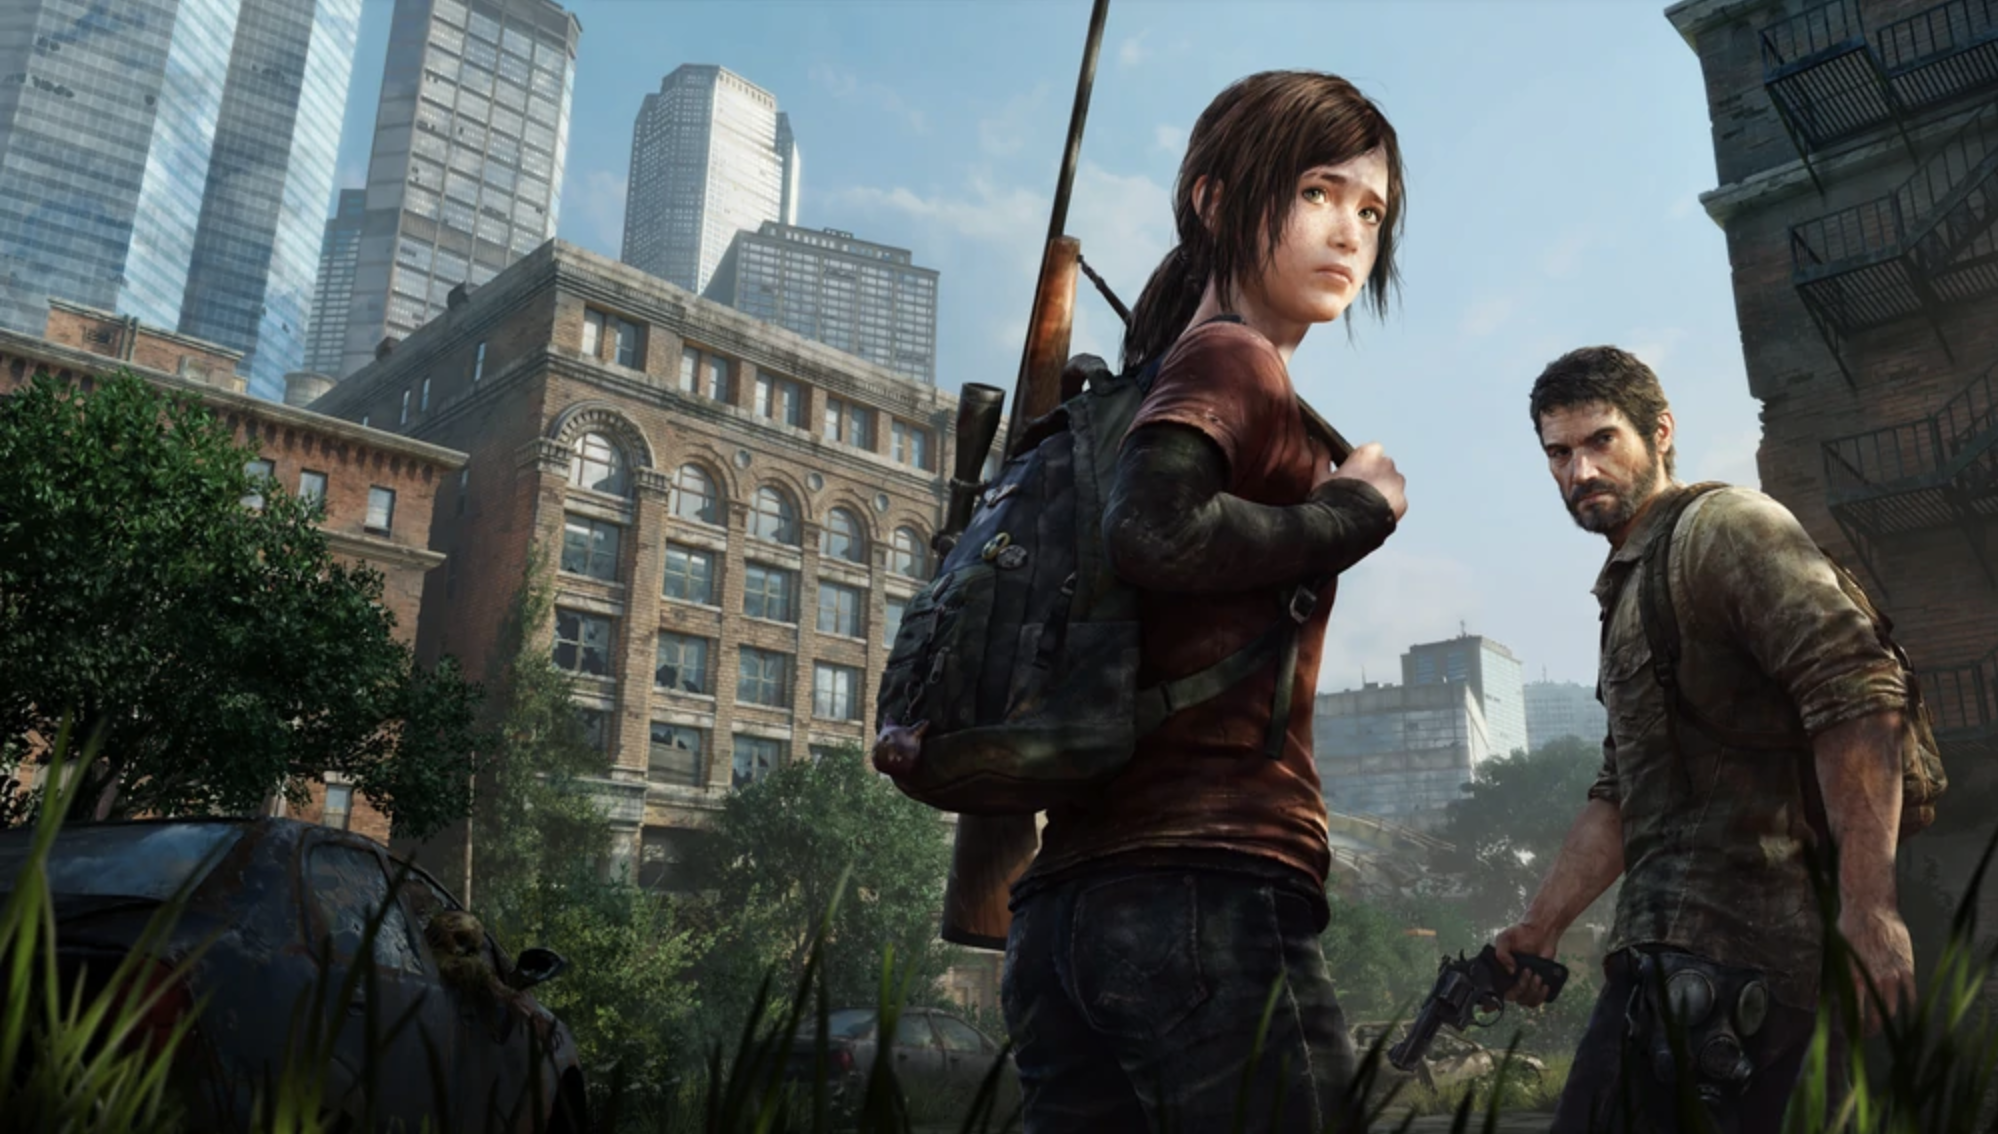 Could Naughty Dog Salvage Anything For A Simpler 'Last Of Us